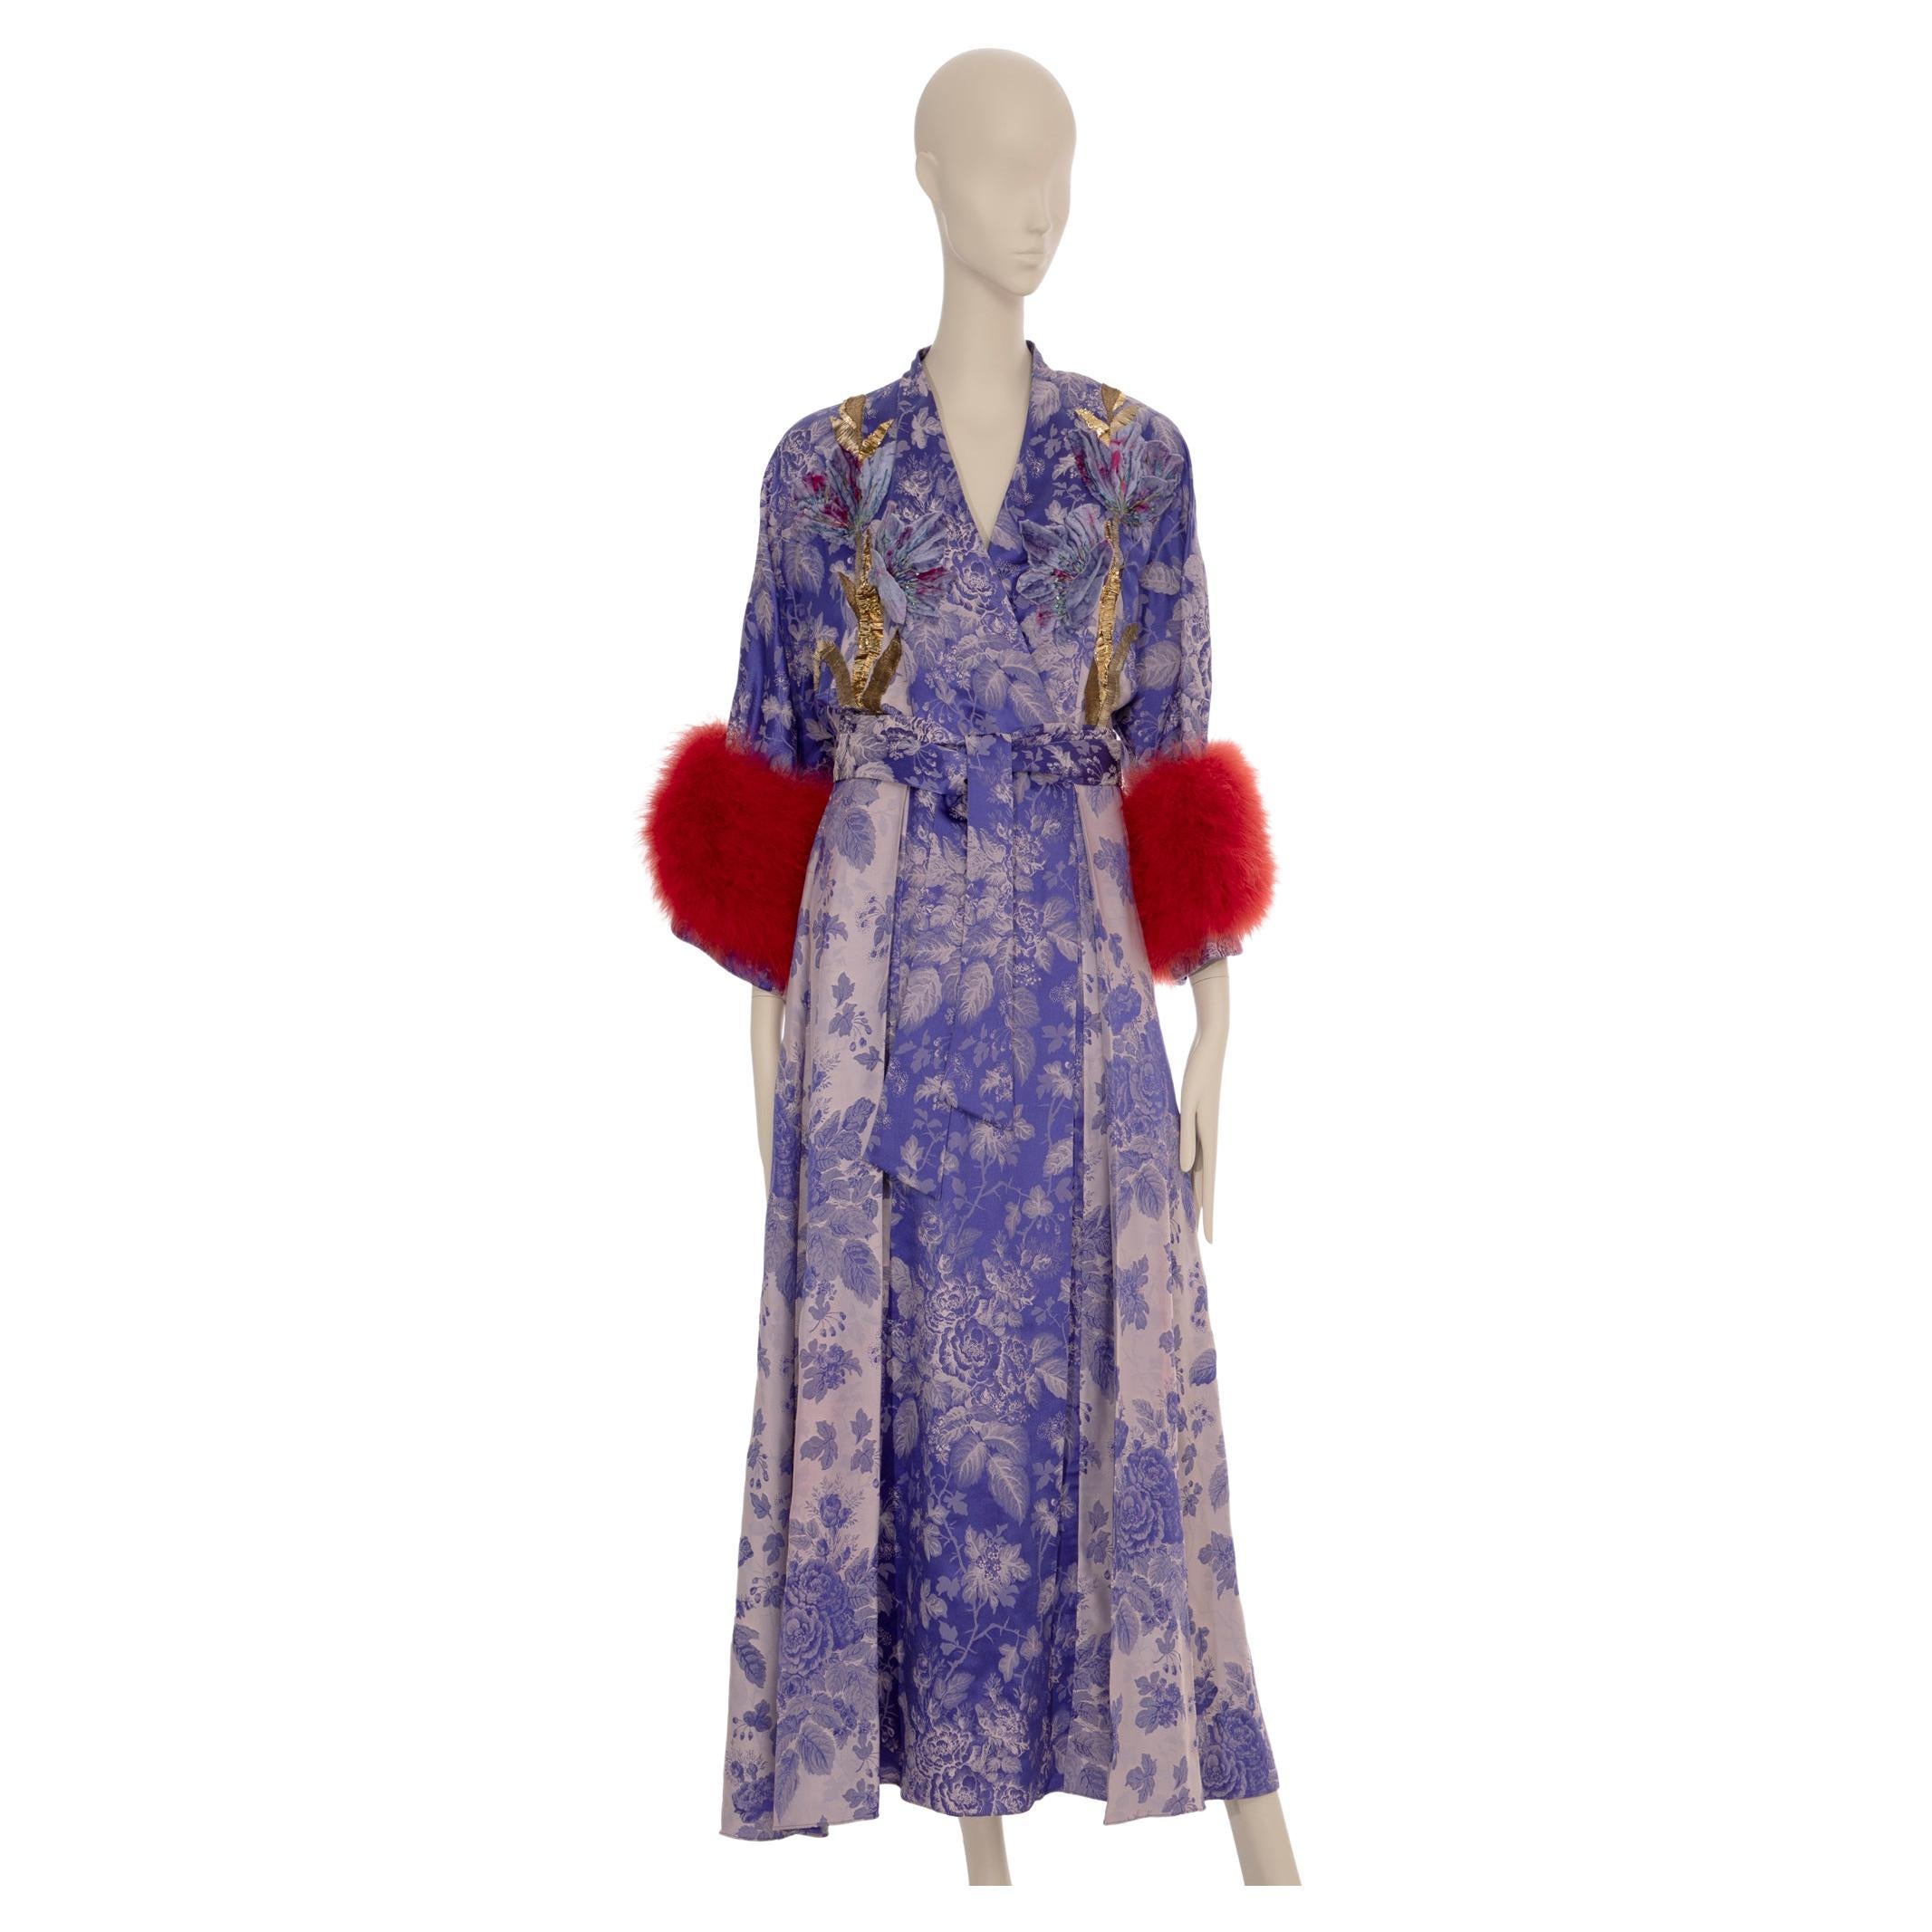 Gucci Floral Jacquard Wrap Dress With Ostrich Feathers 38 It